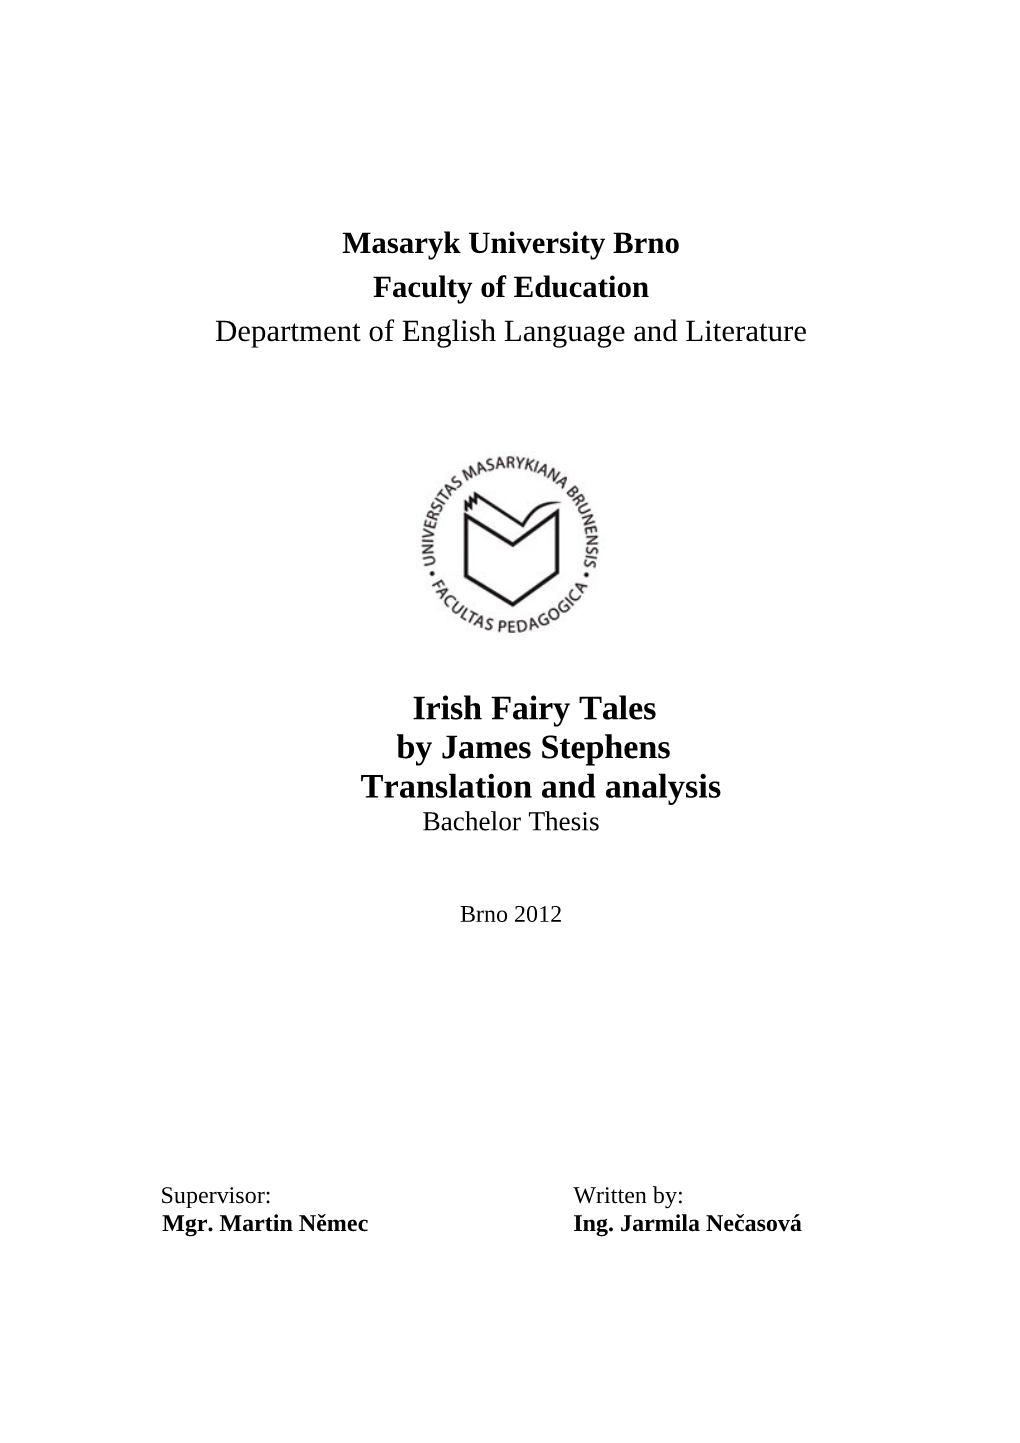 Irish Fairy Tales by James Stephens Translation and Analysis Bachelor Thesis